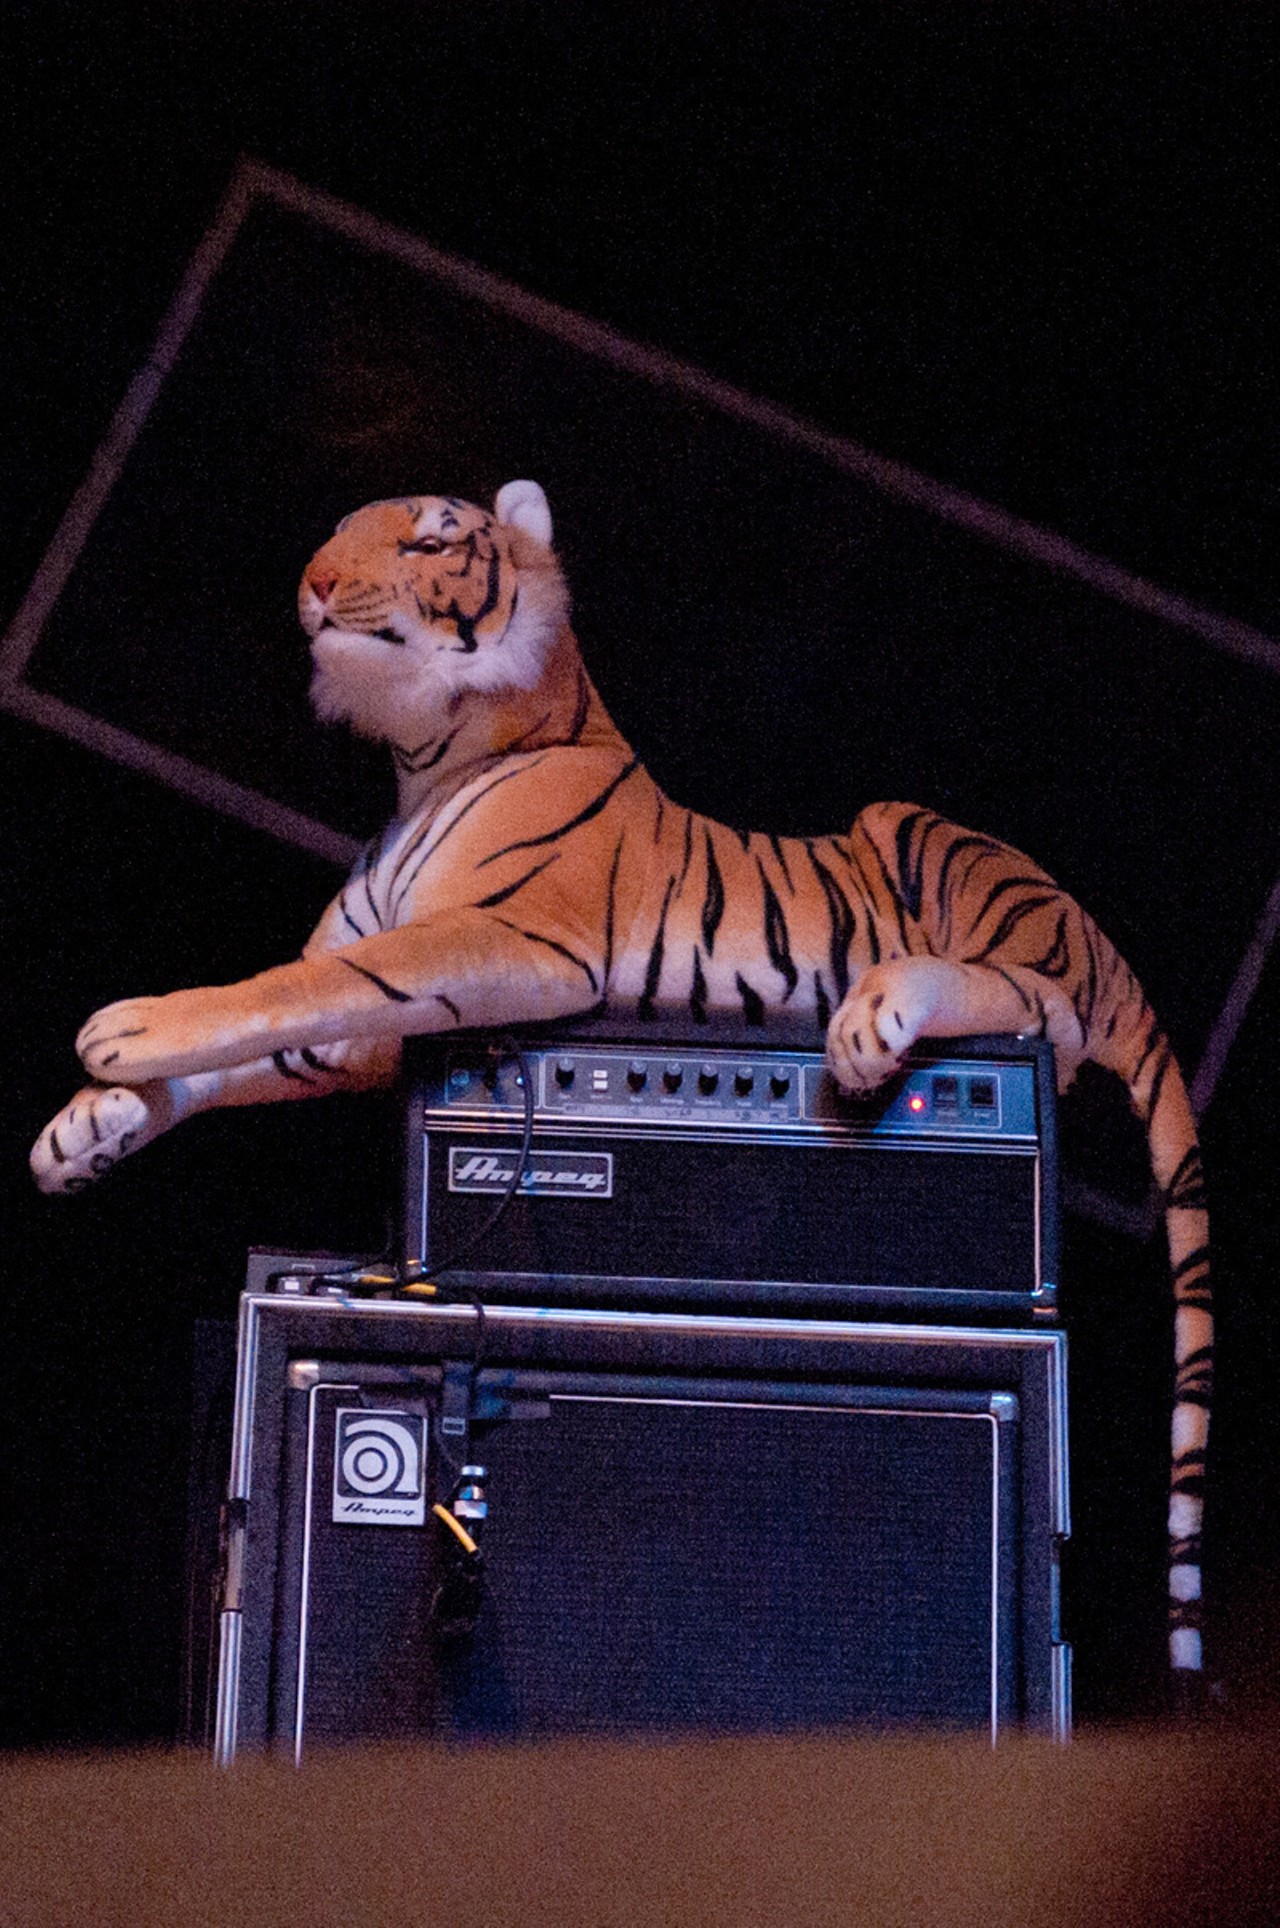 A stuffed tiger made for interesting stage decor for Grace Potter.